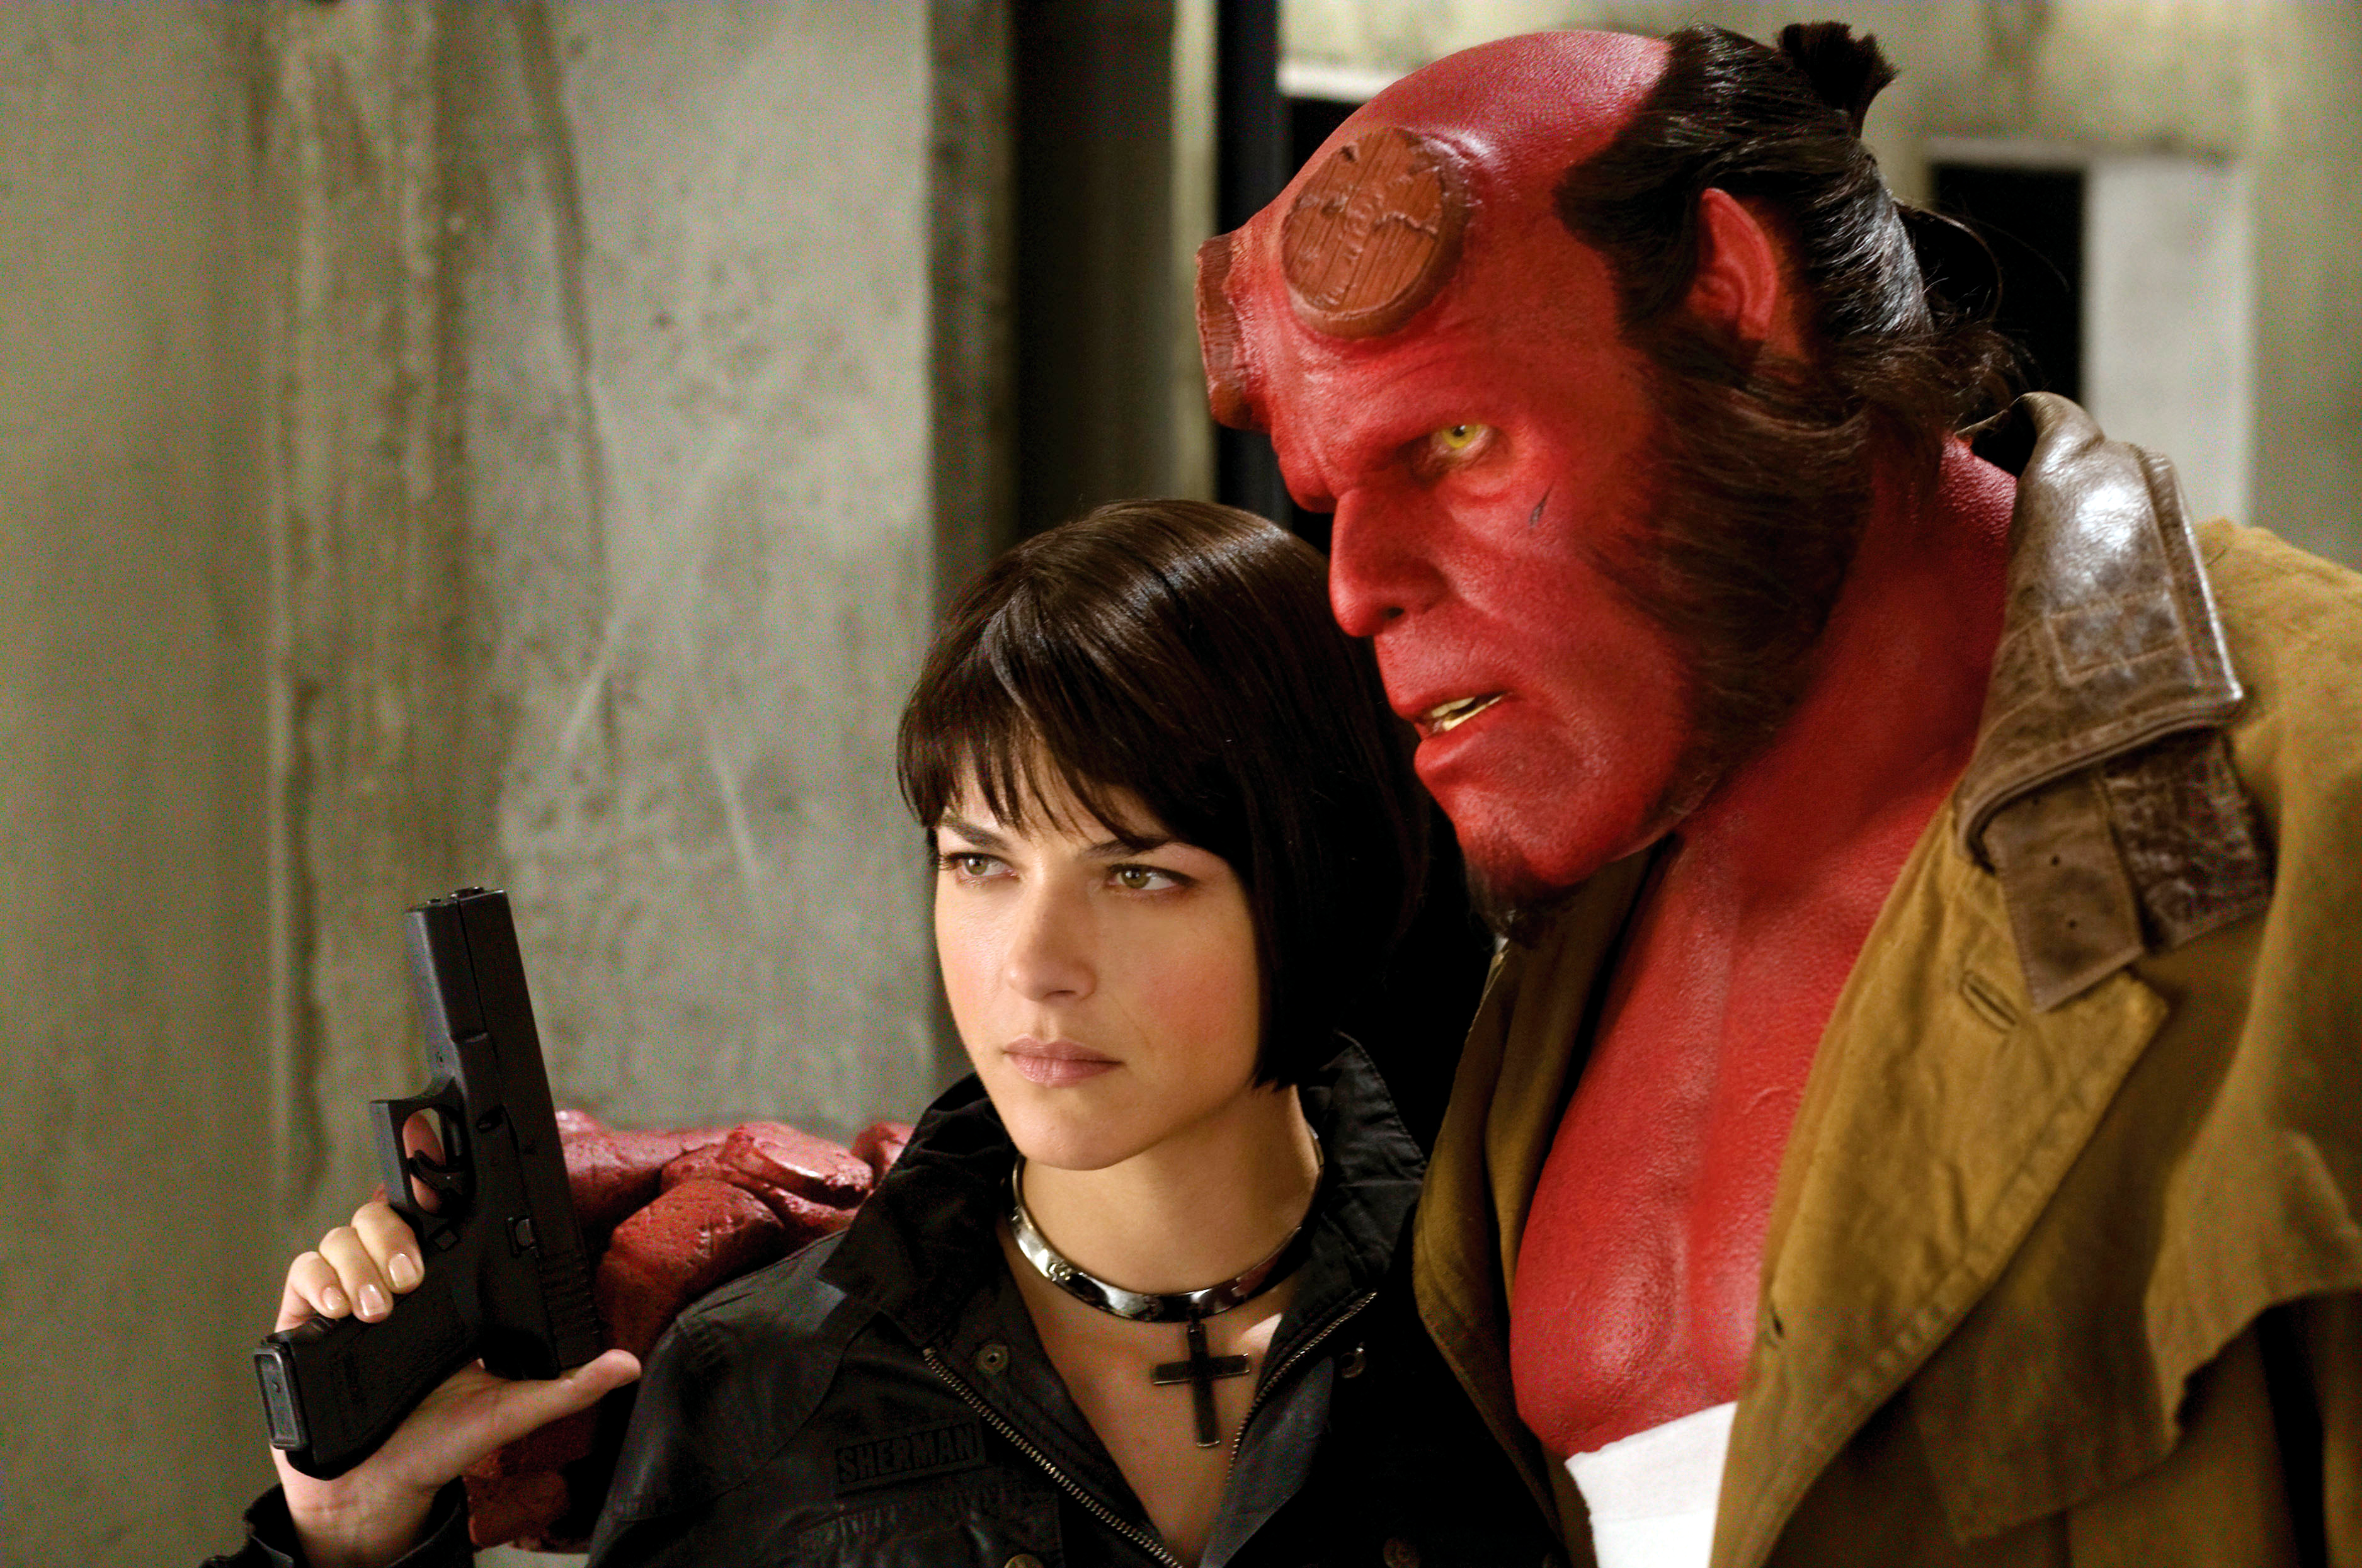 Movie Hellboy II: The Golden Army HD Wallpaper | Background Image